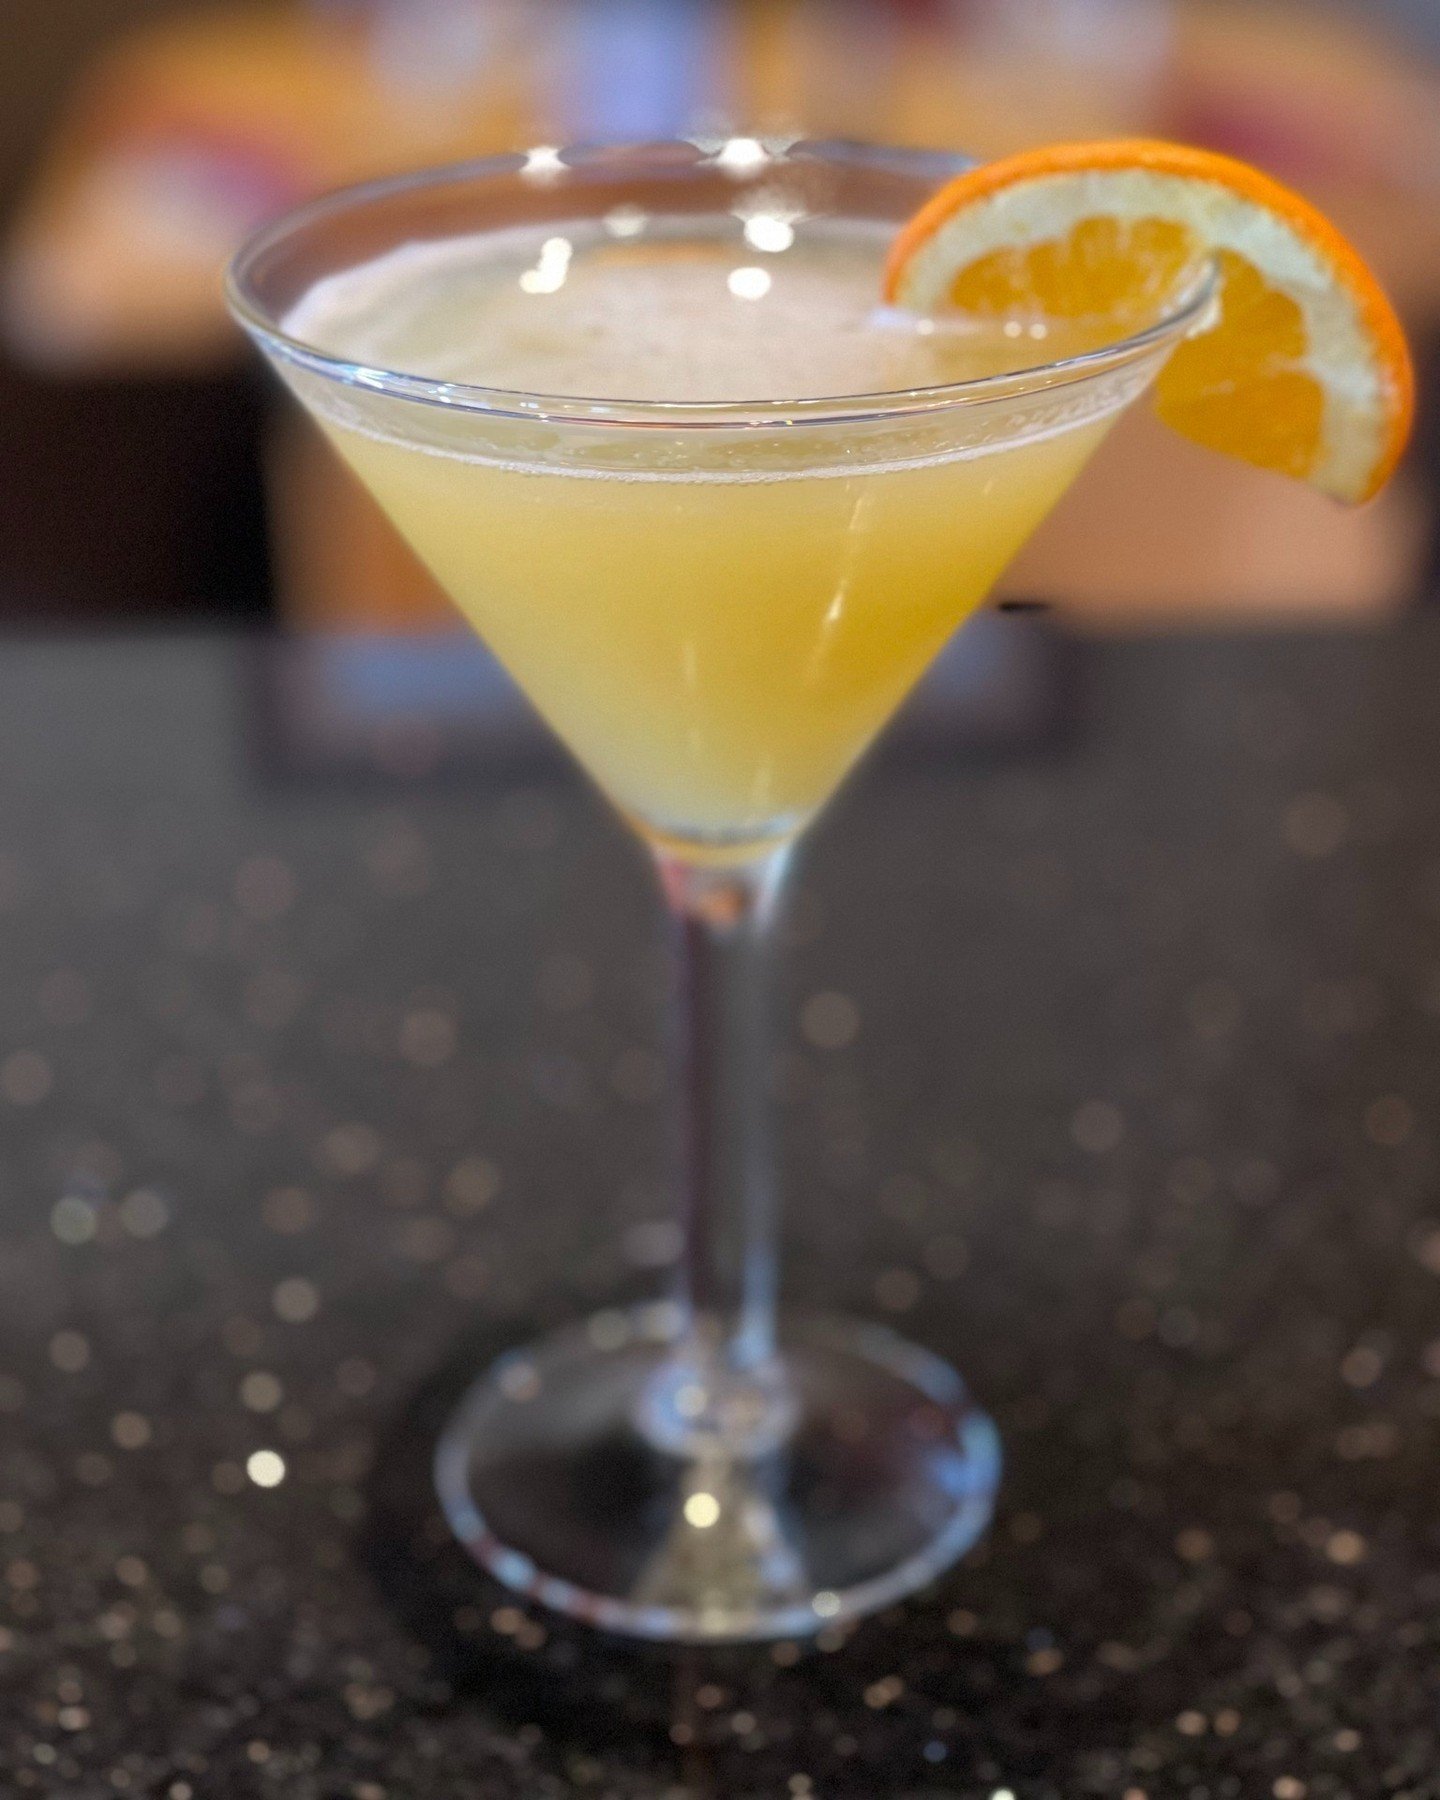 The BEST hours are spent at Ike's Restaurant from 4pm to 7pm Mondays through Fridays! 🍸⠀
Come out and try our #HappyHour Specials today!⠀
⠀
#IkesRestaurant #SterlingHeights #MacombCounty #MediterraneanCuisine #LebaneseCuisine #HappyHour #Drinks #Mar